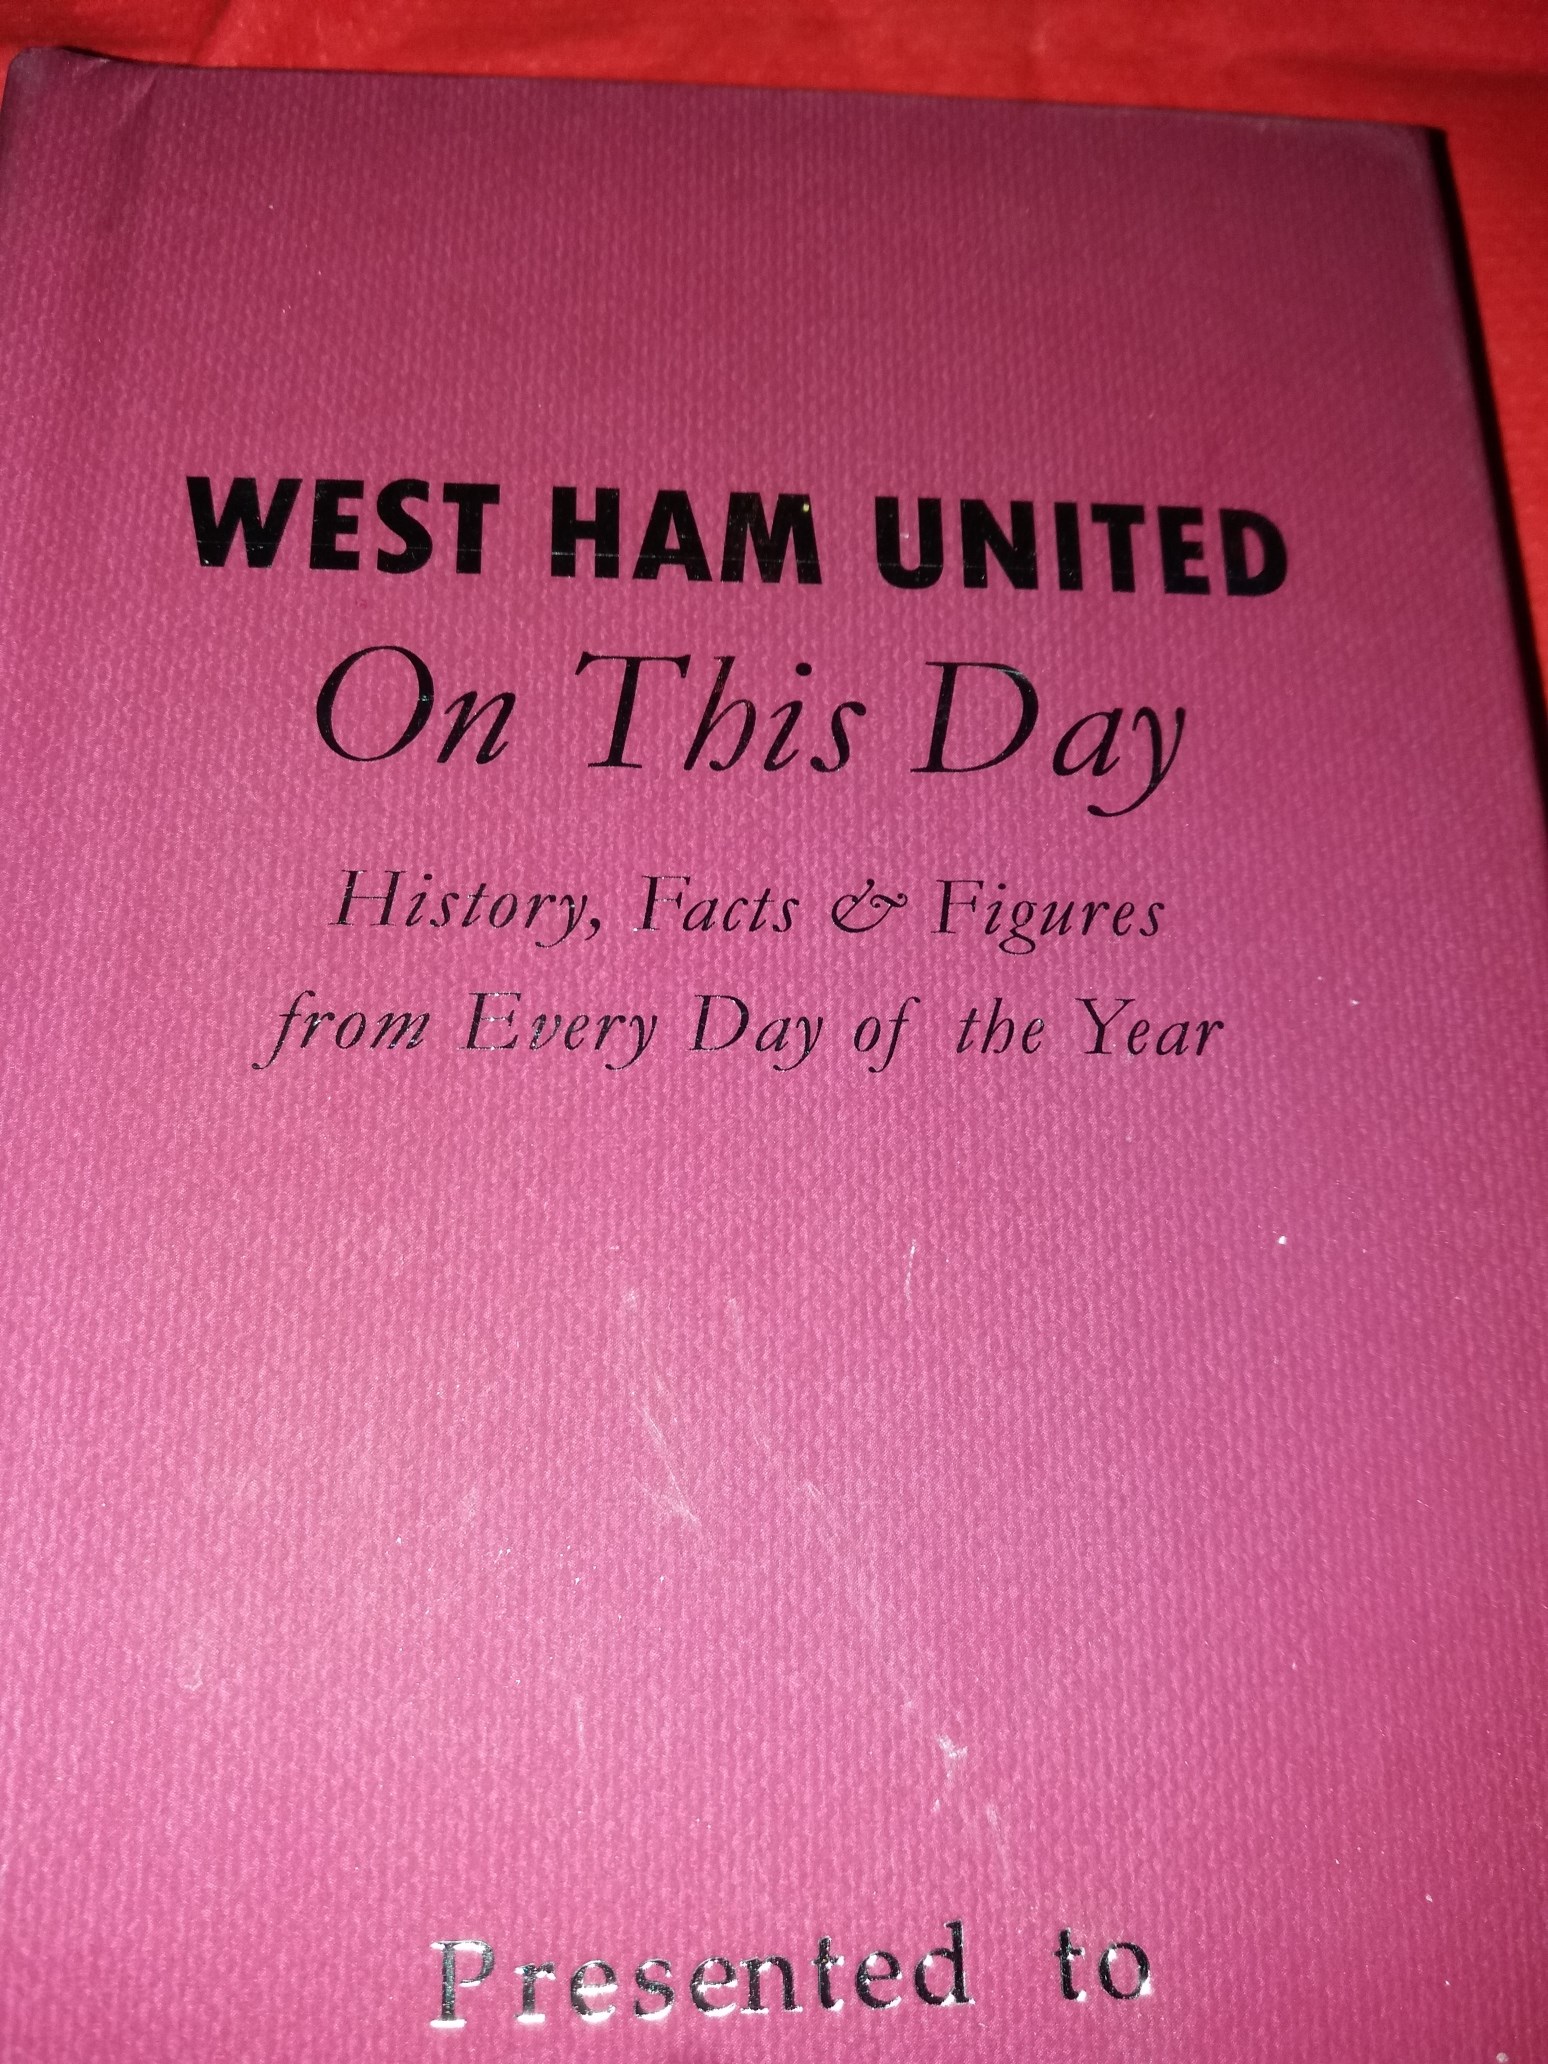 The Official West Ham United Thread. Vol 2 - Page 389 - Football - PistonHeads